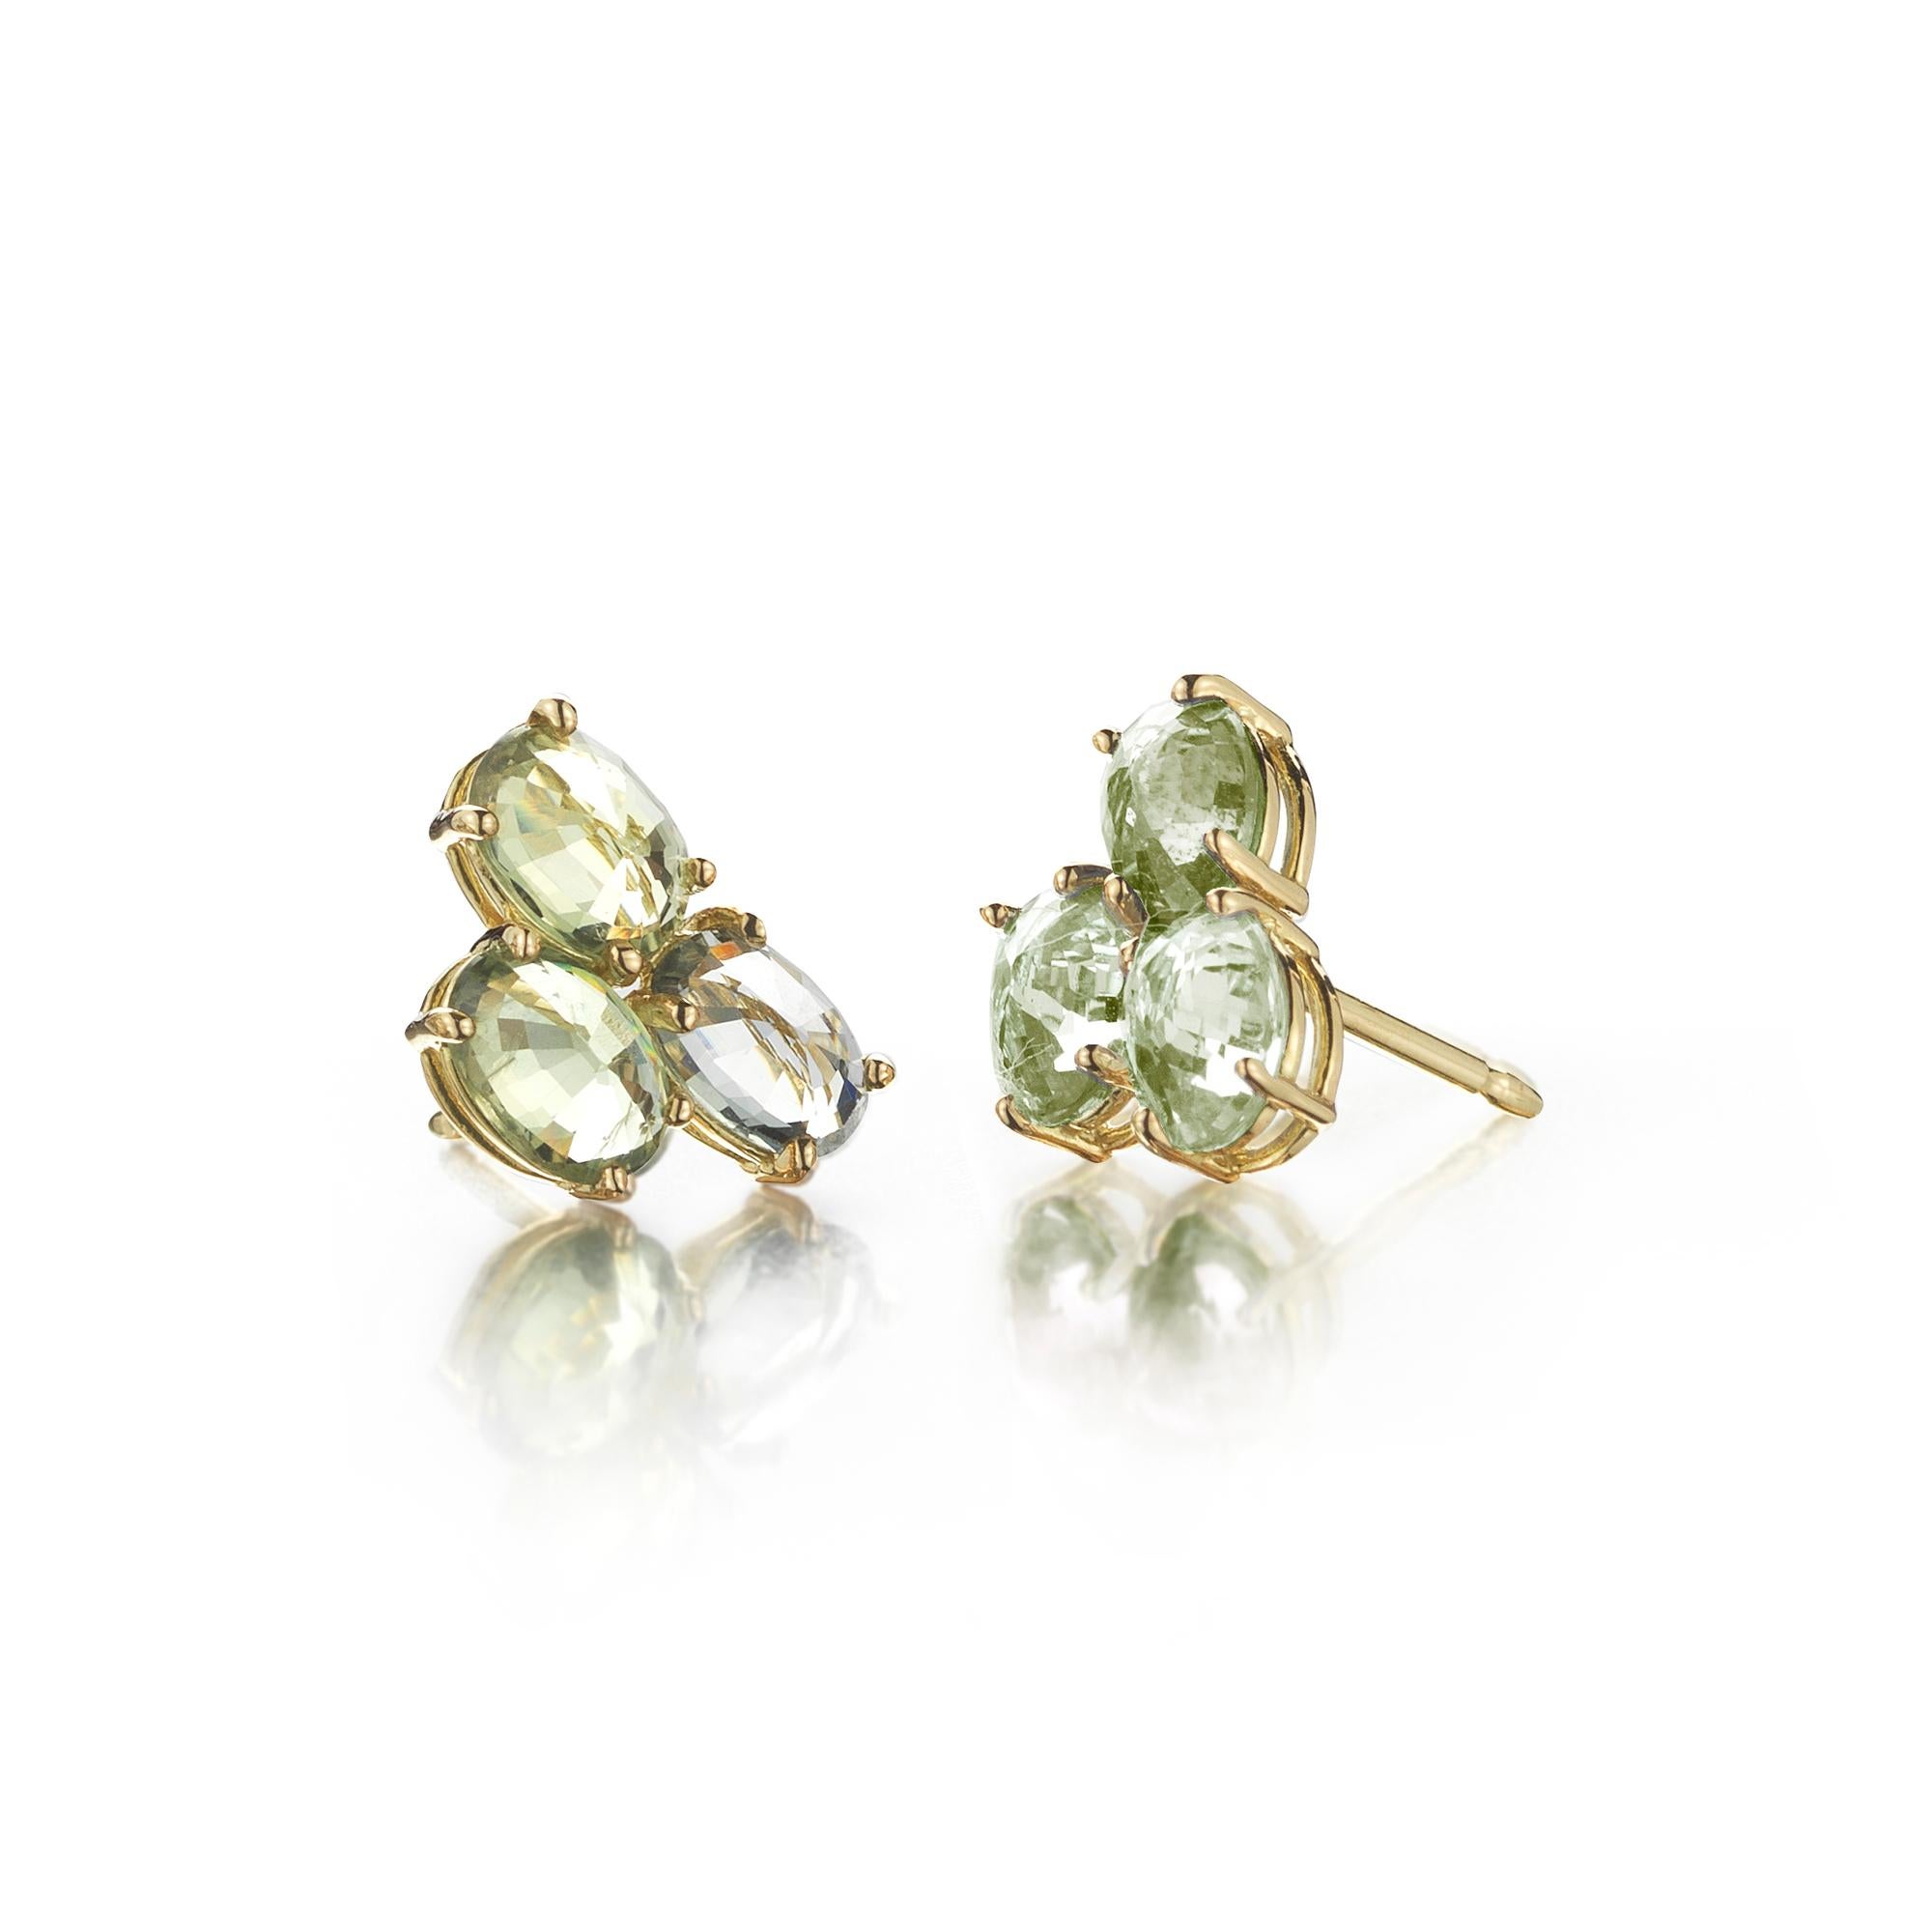 Round Cut Paolo Costagli 18 Karat Yellow Gold Green Sapphire Ombré Stud Earring Set For Sale